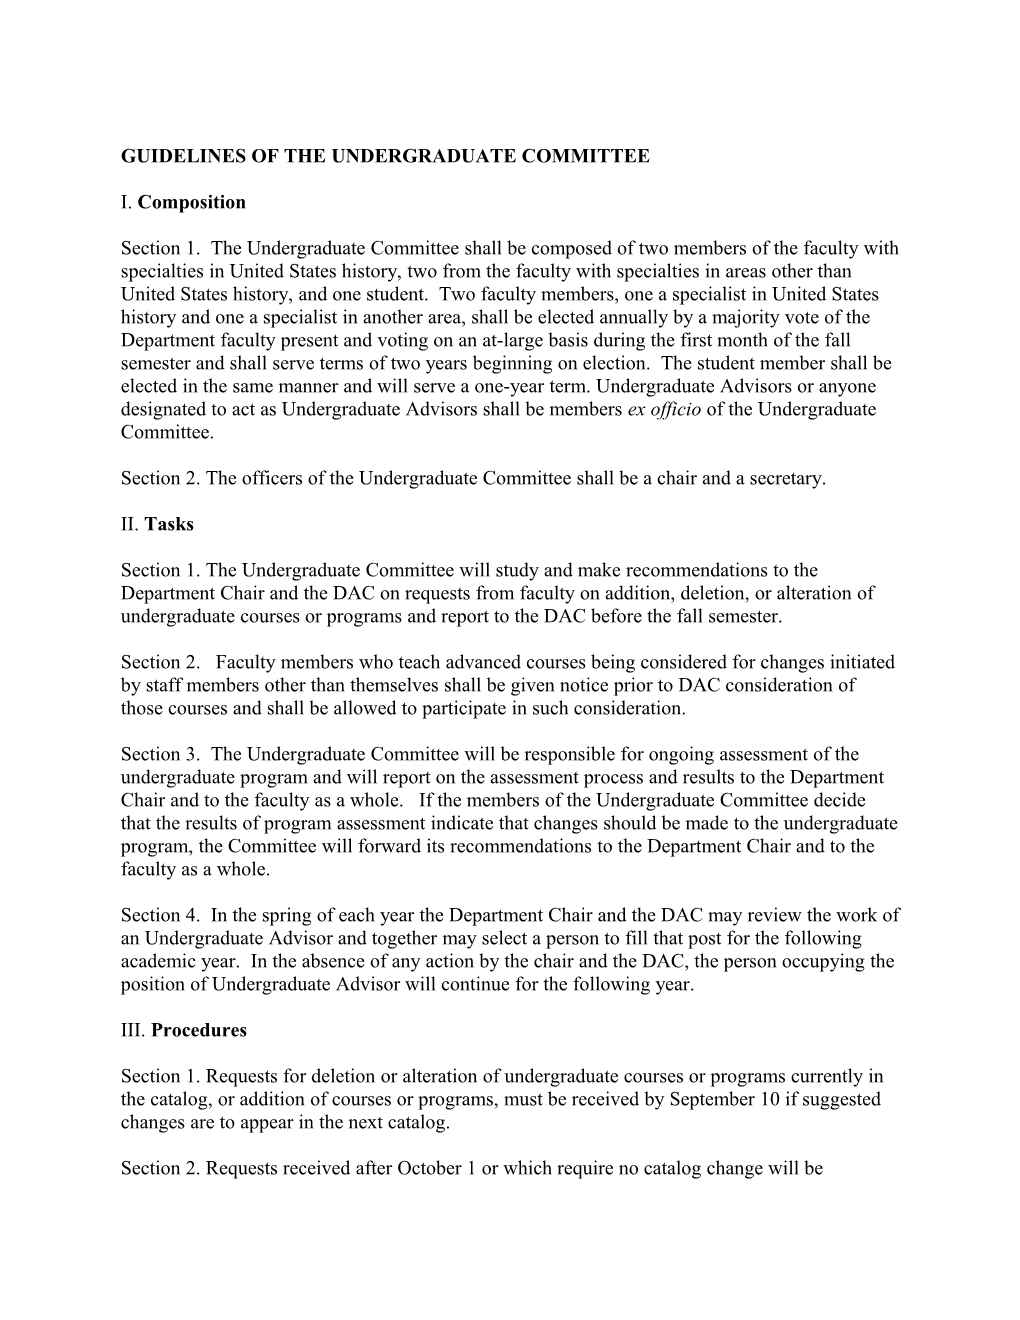 Guidelines of the Undergraduate Committee